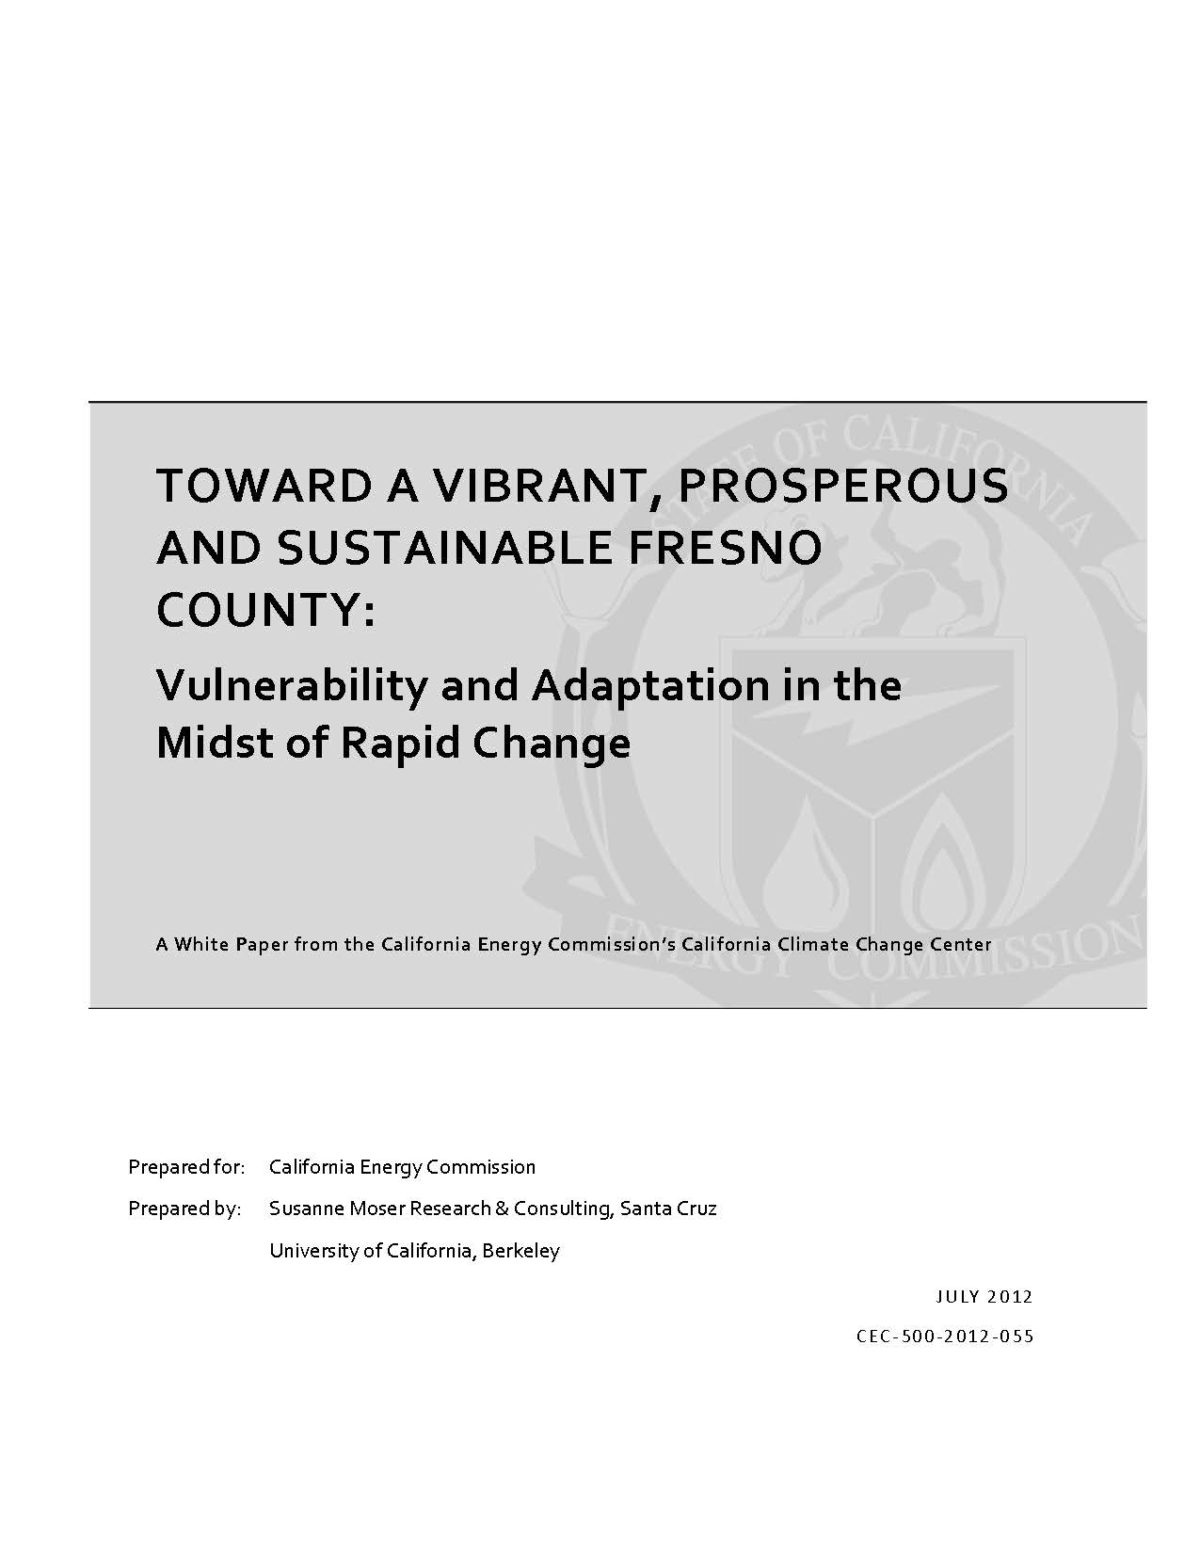 Toward a Vibrant, Prosperous, and Sustainable Fresno County: Vulnerability and Adaptation in the Midst of Rapid Change